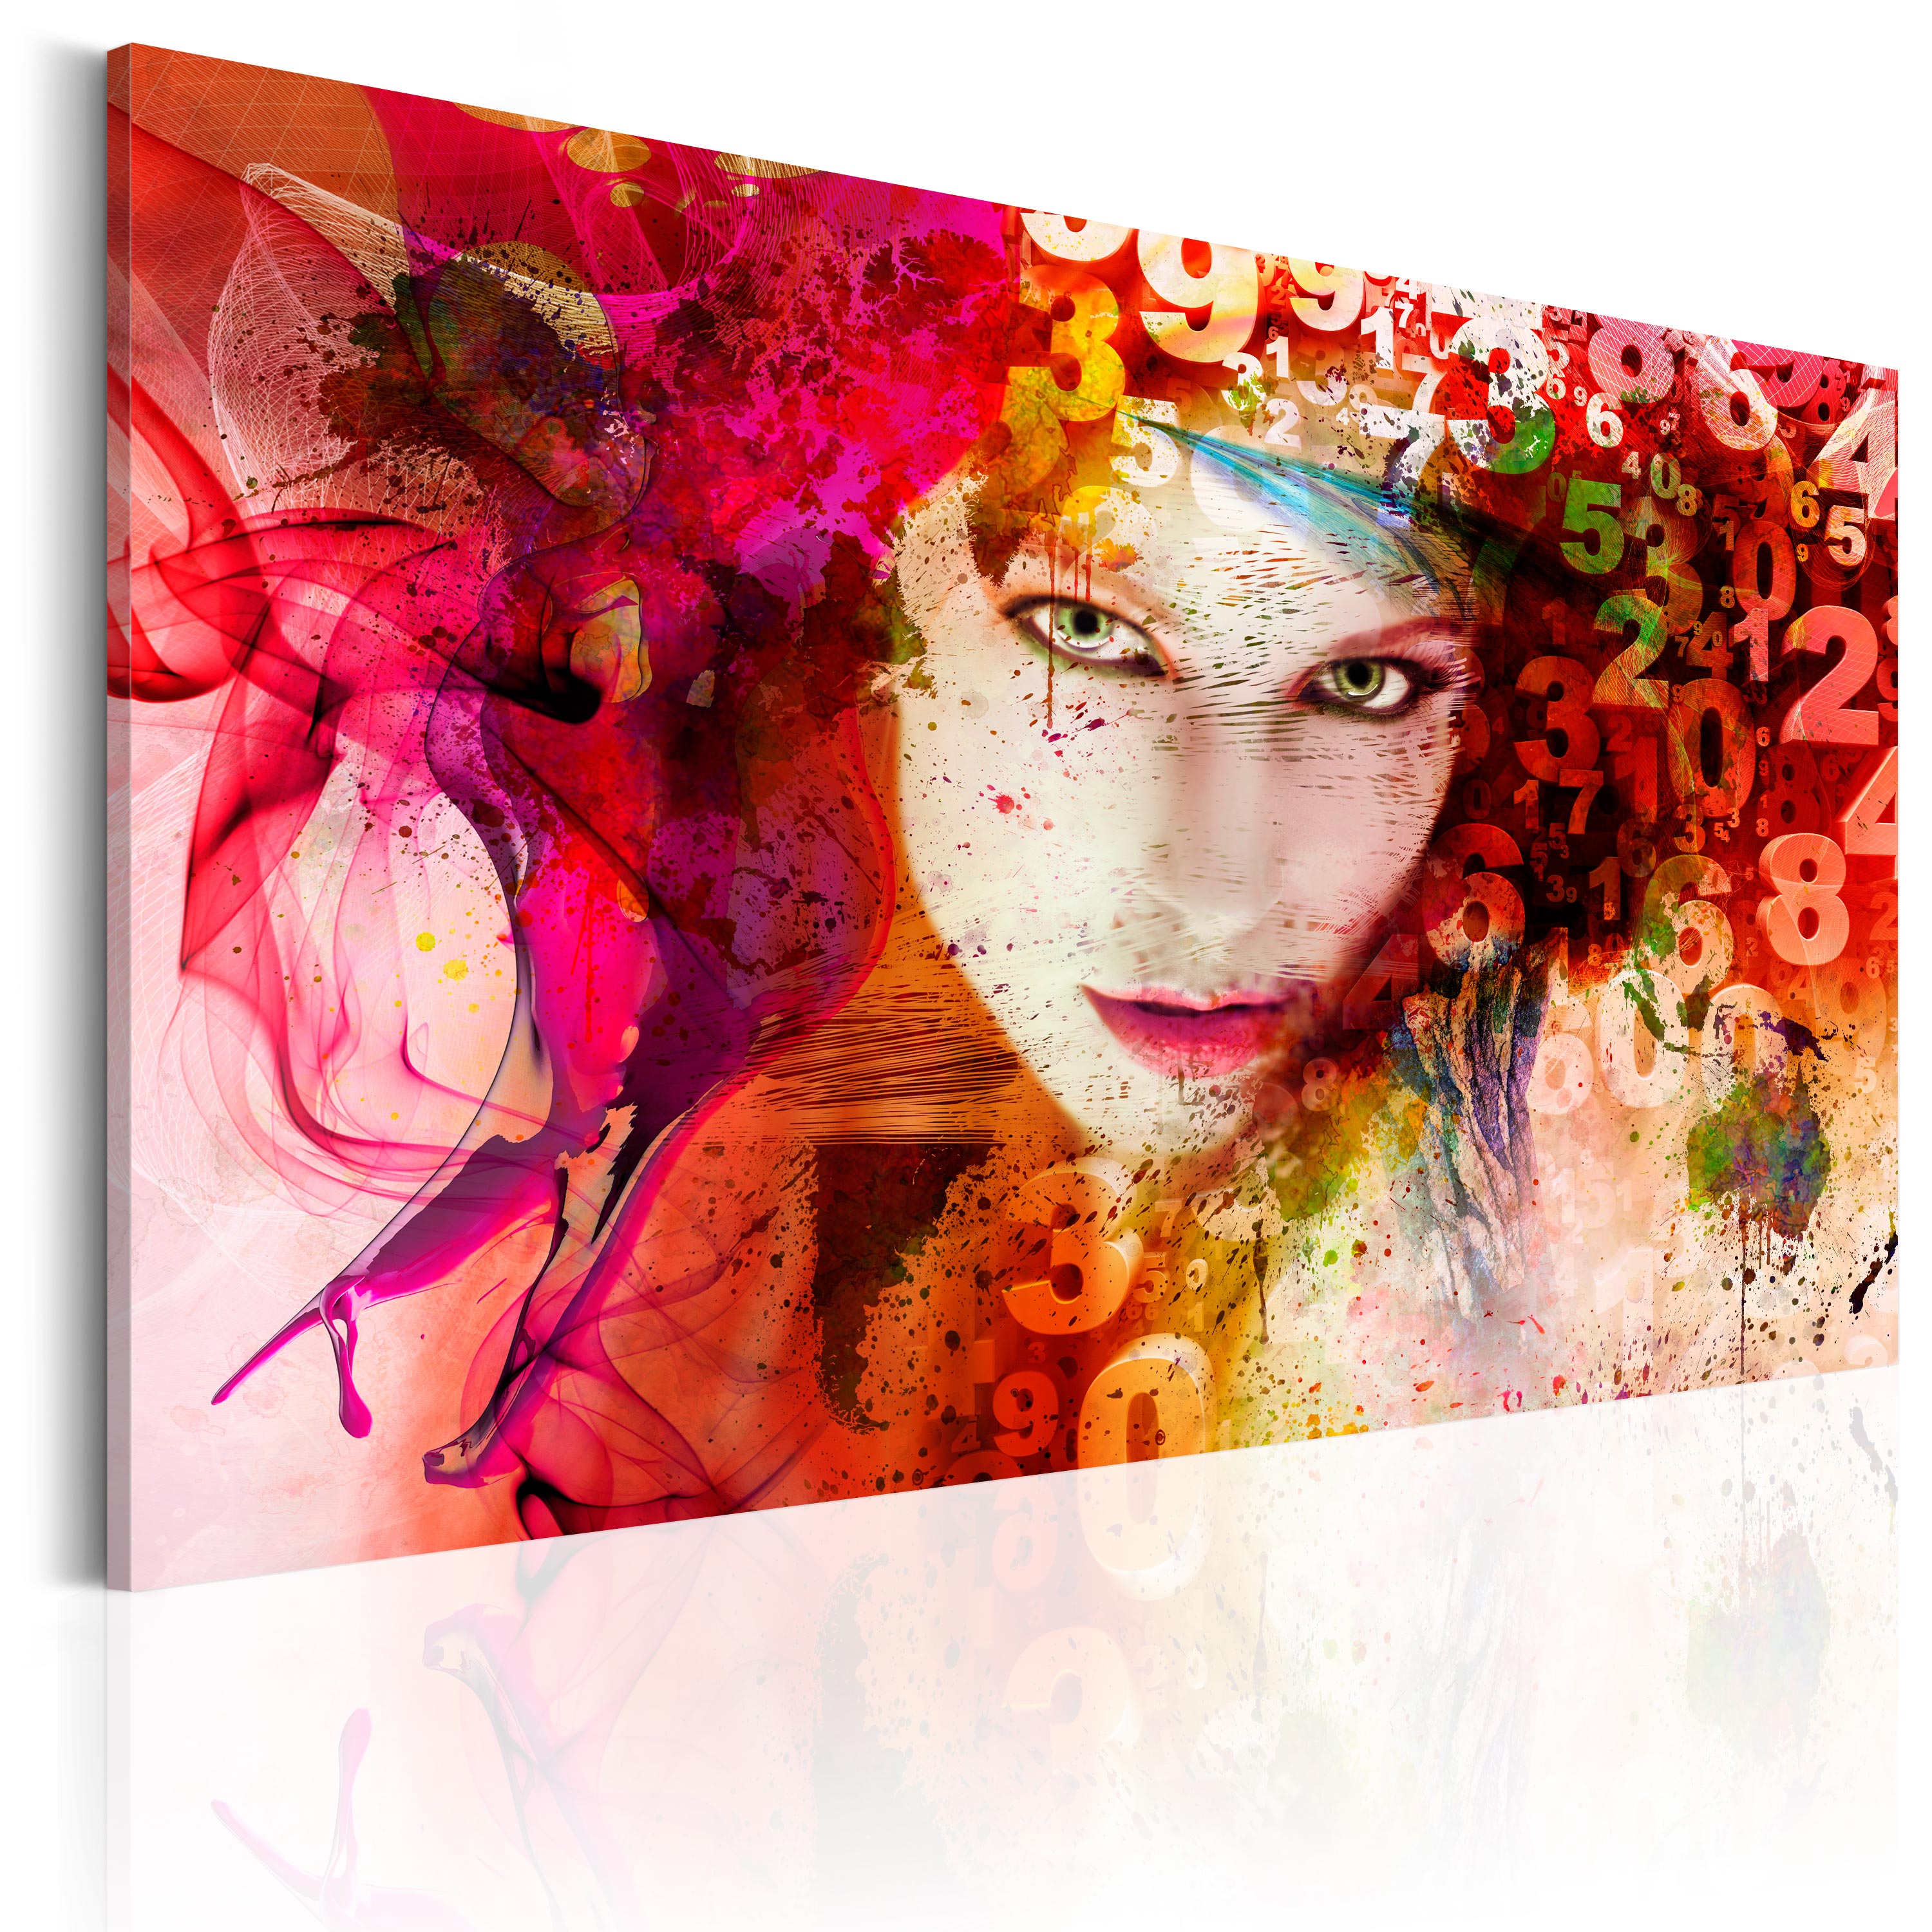 Canvas Print - Woman is a Riddle - 60x40